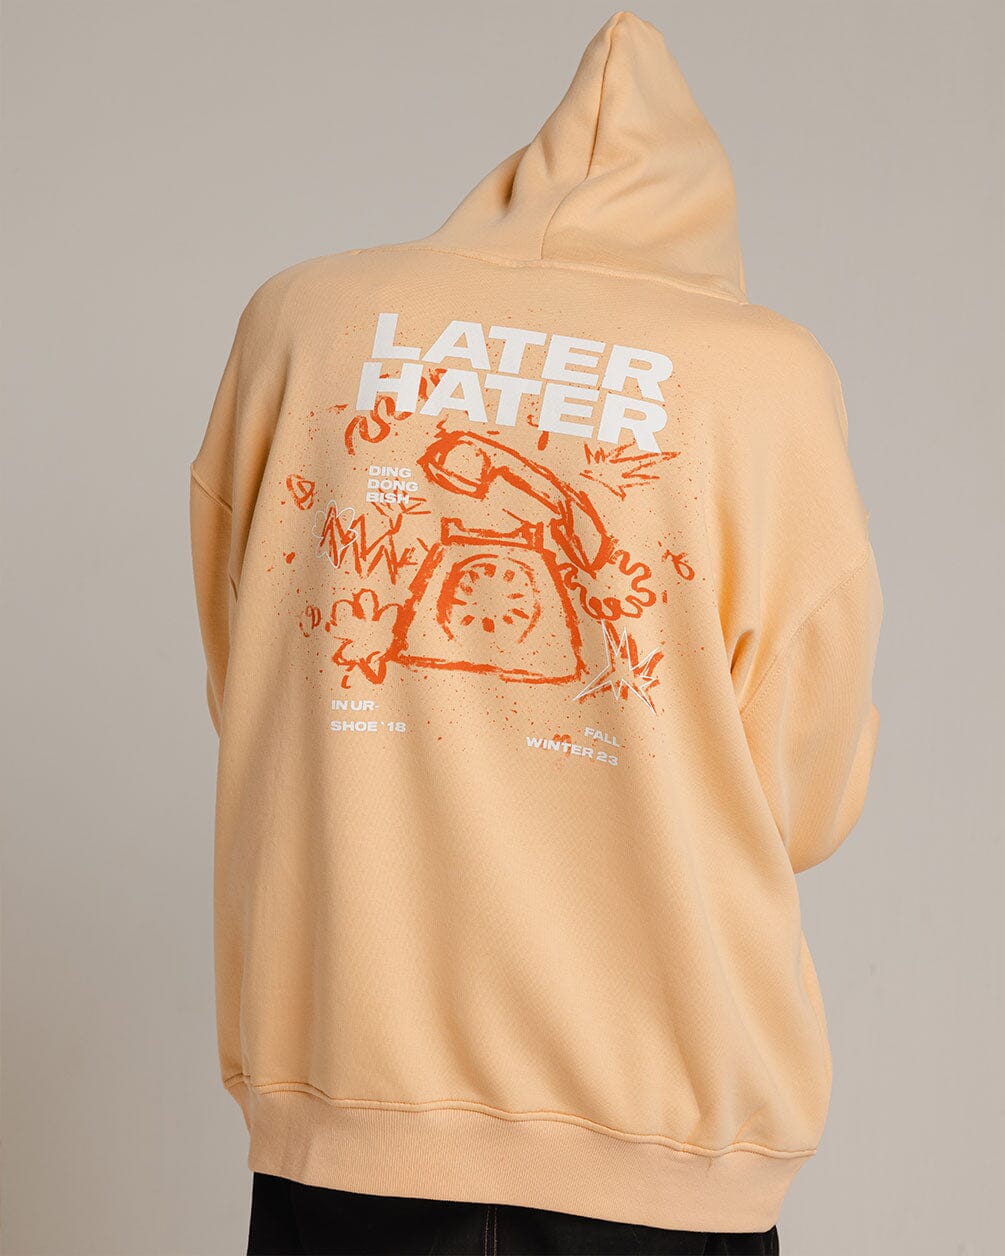 Later Hater Hoodie Printed Hoodies IN YOUR SHOE XL 